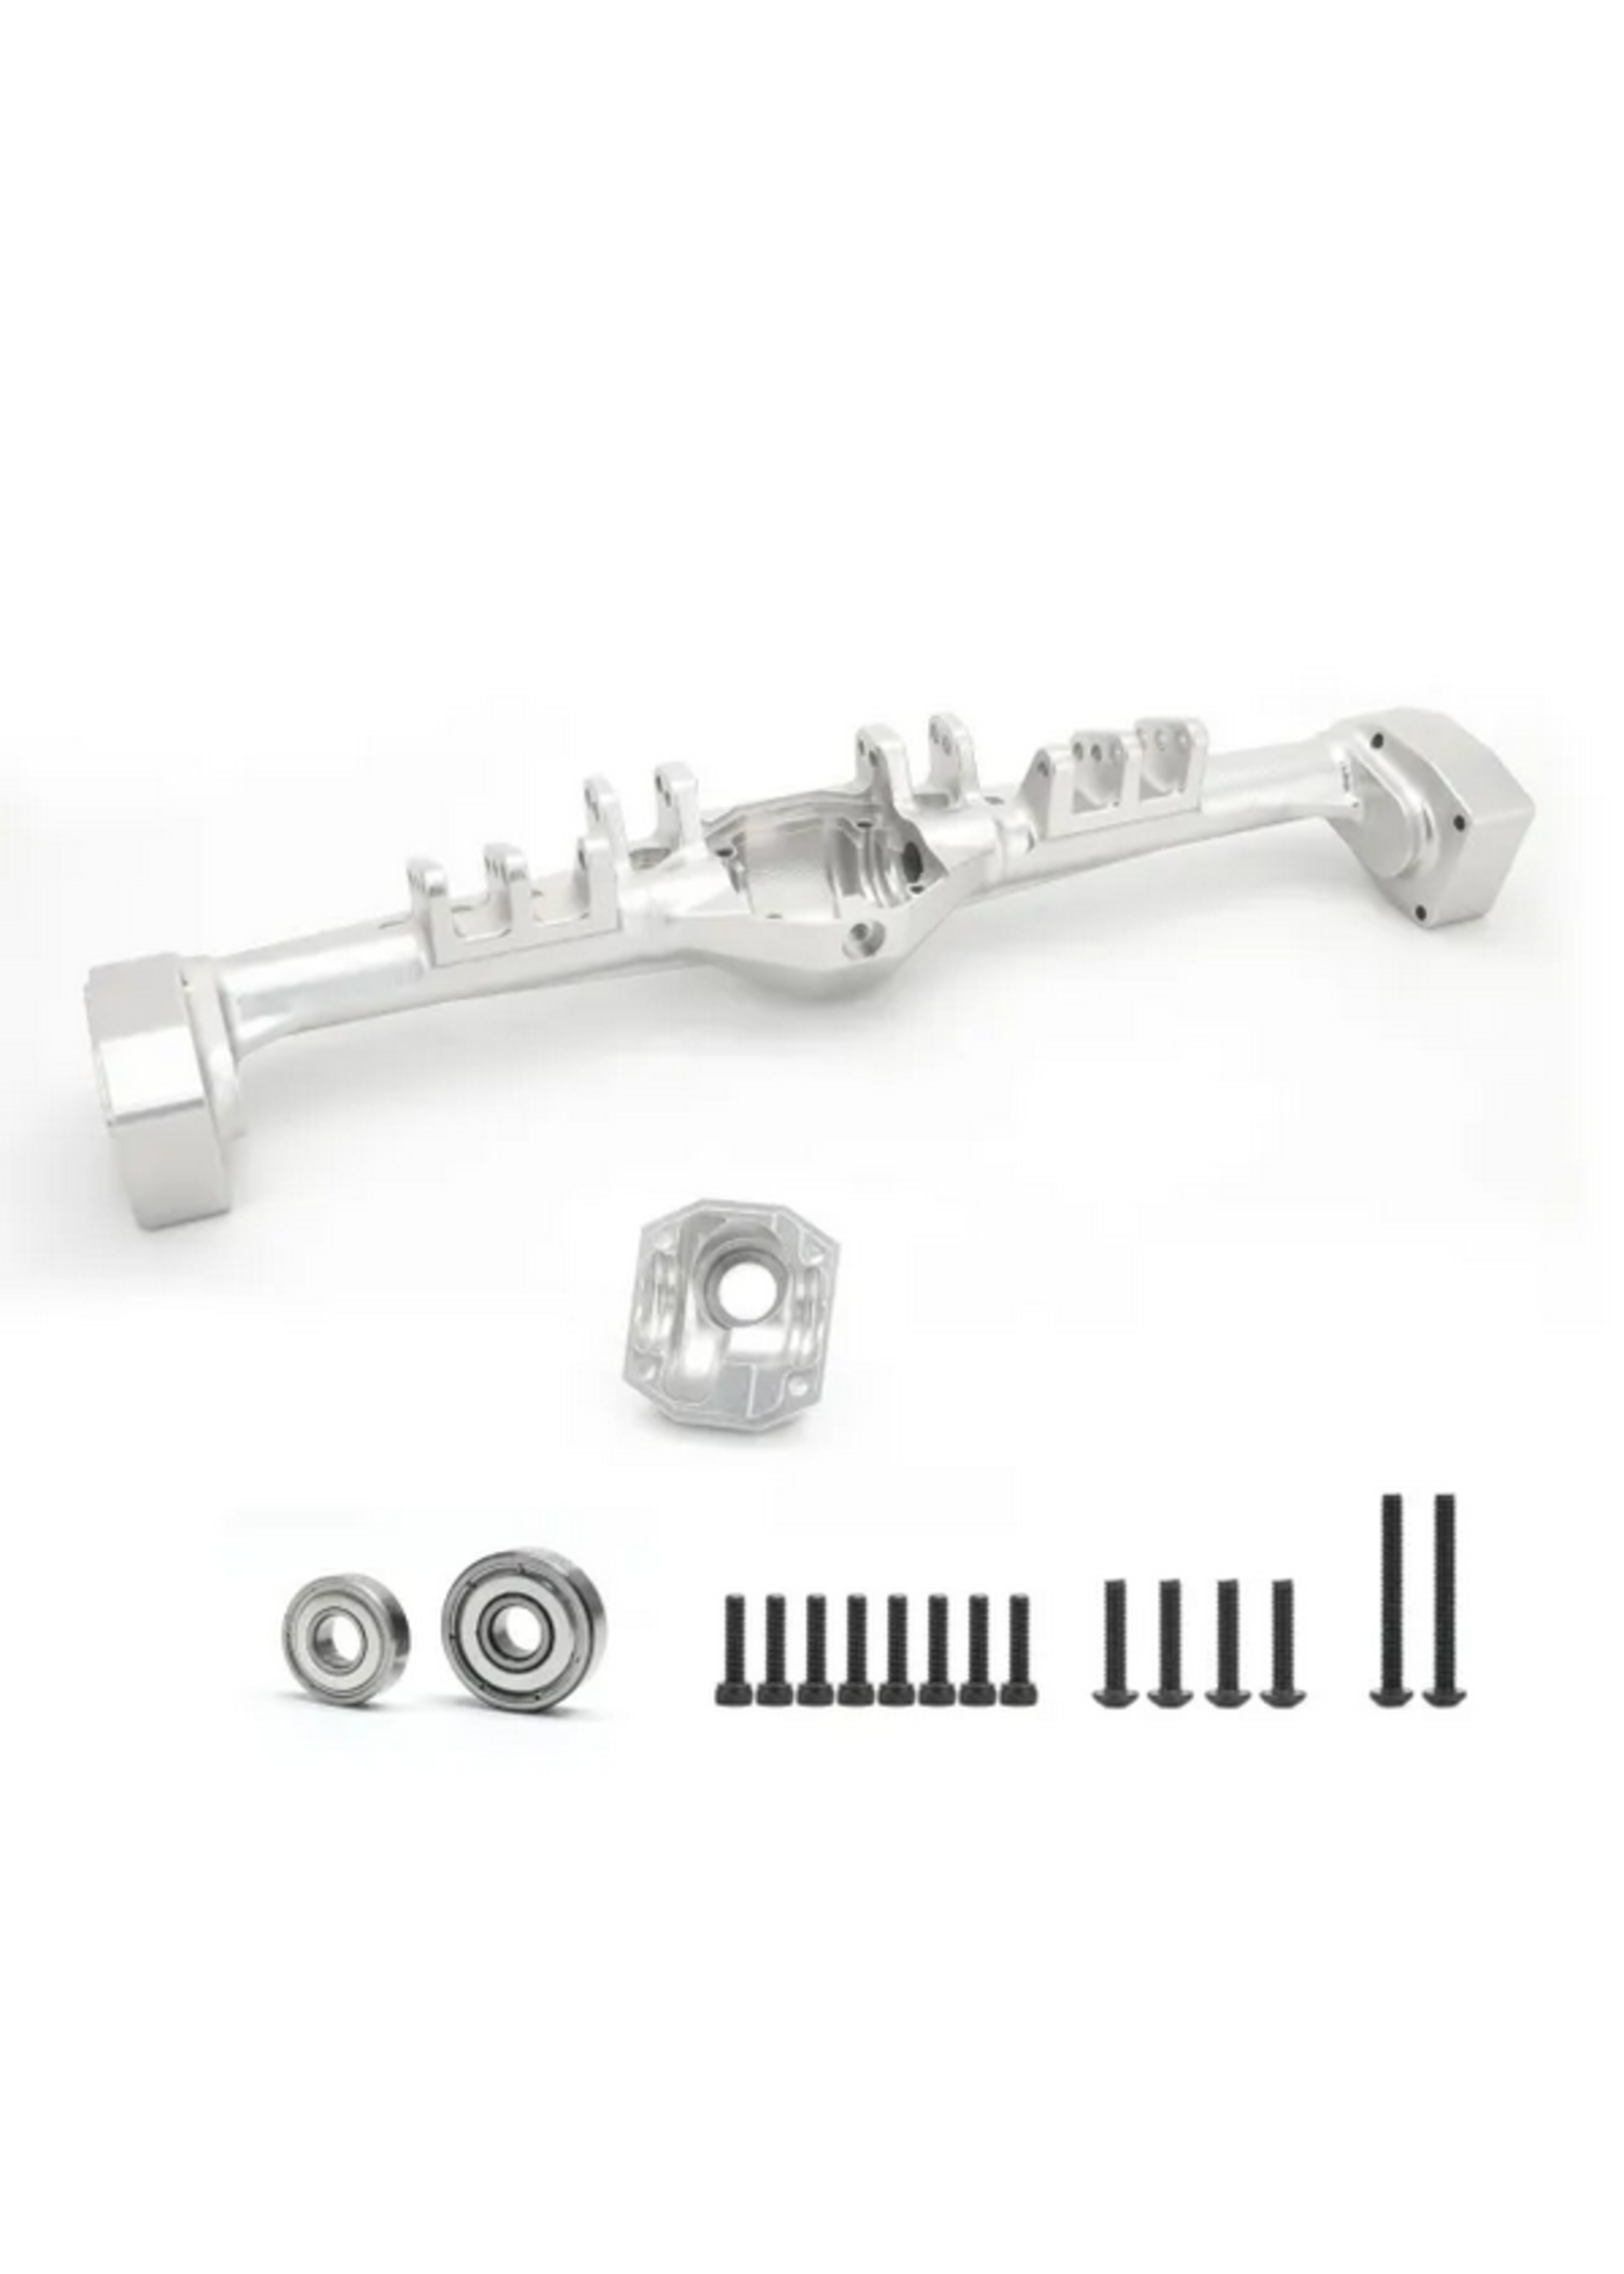 Treal Treal Capra Rear Axle Housing CNC Solid Billet Aluminum 7075 One-Piece Design (Clear)